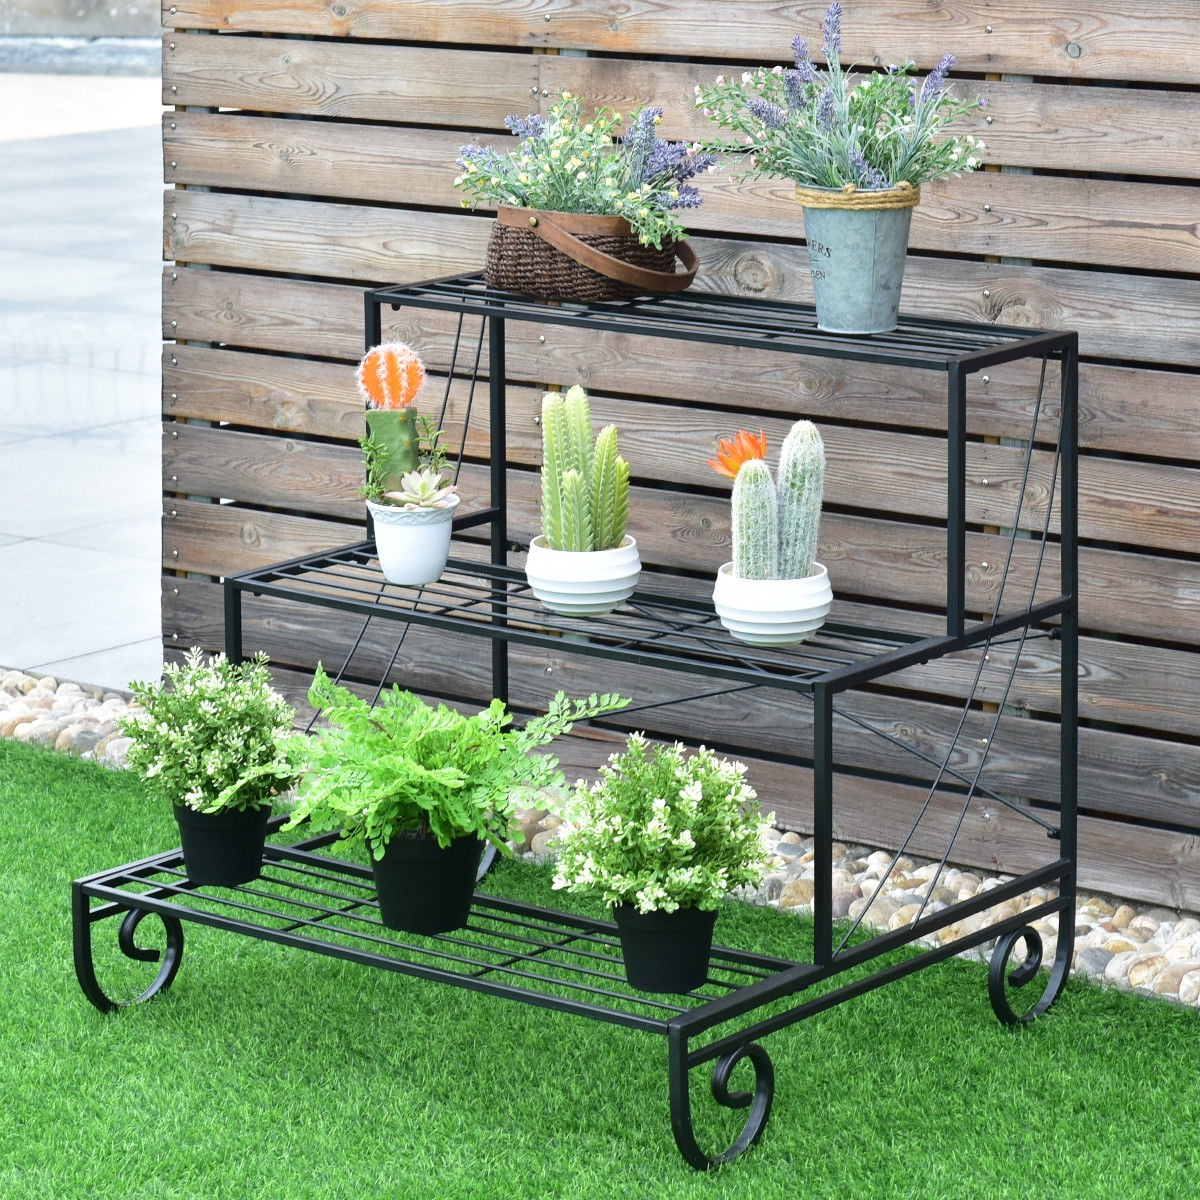 Set of 3 Plant Stand Flower Table Garden Display Outdoor Home Decor Metal Black 